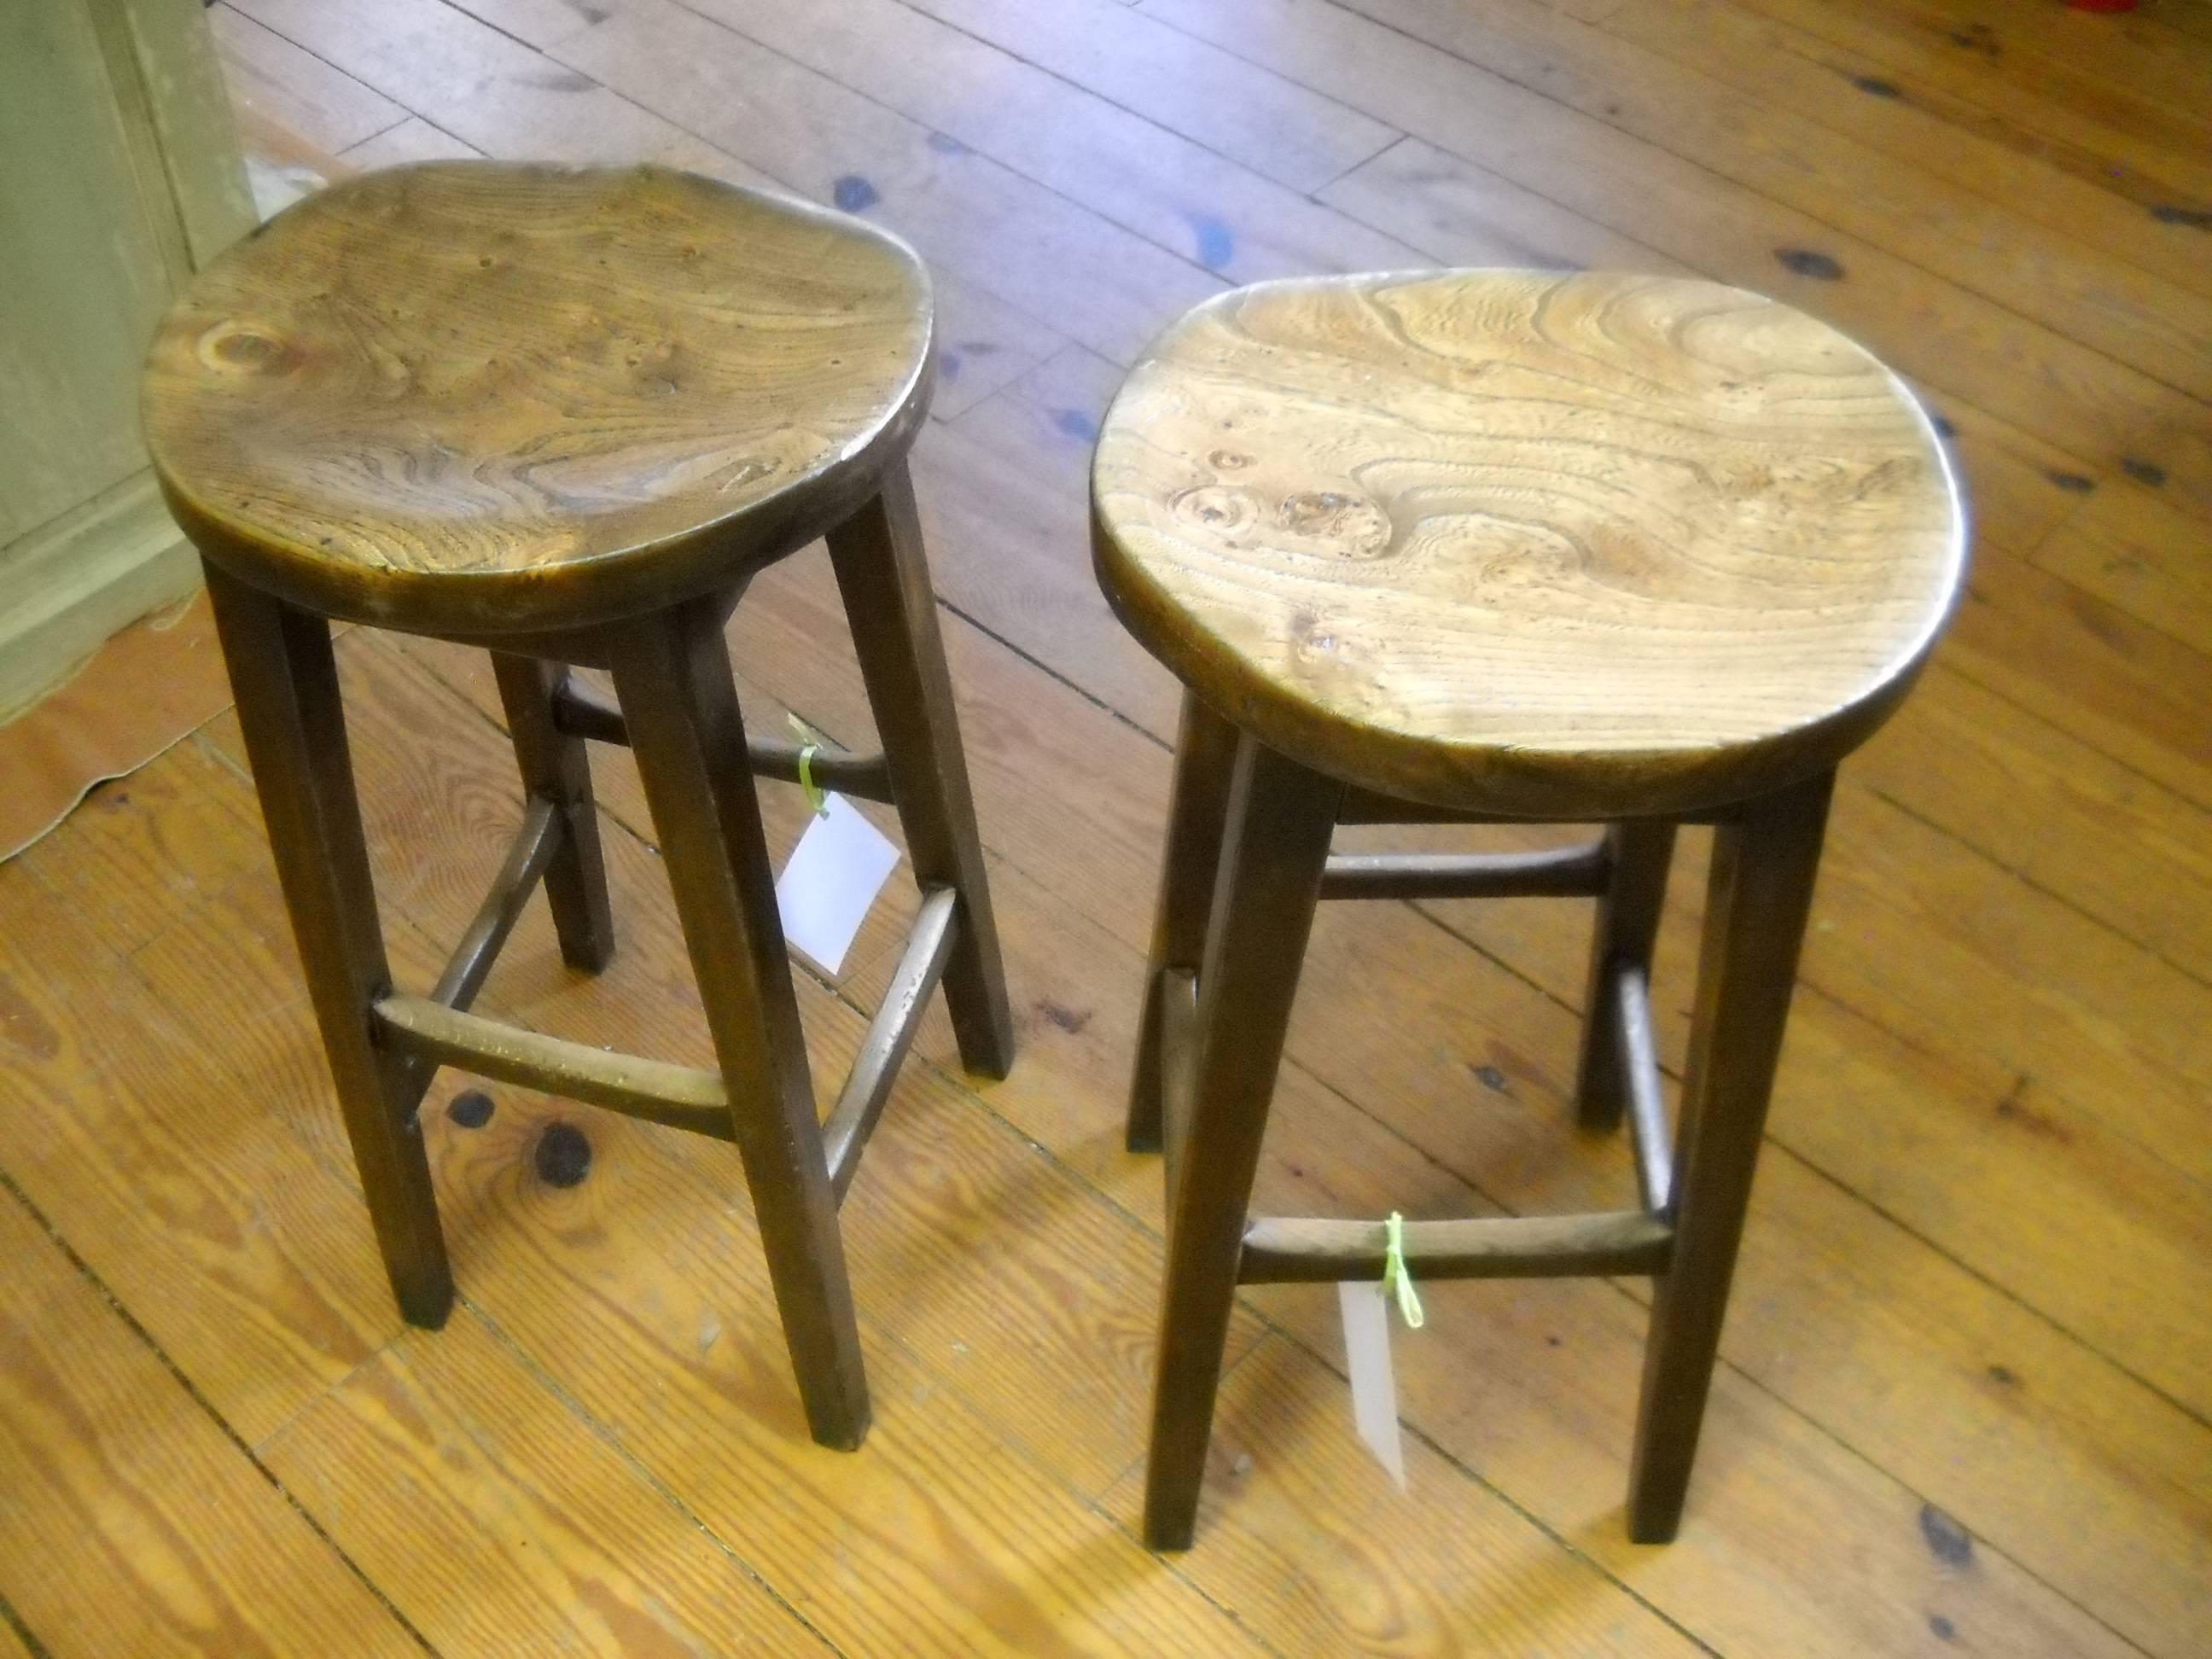 This pair of stools come from a pub in the UK. We have many stools in the store and all of them come from English pubs. However this pair are called saddle stools and are our most comfortable stools. The wood is elm and the grain is wonderful. There